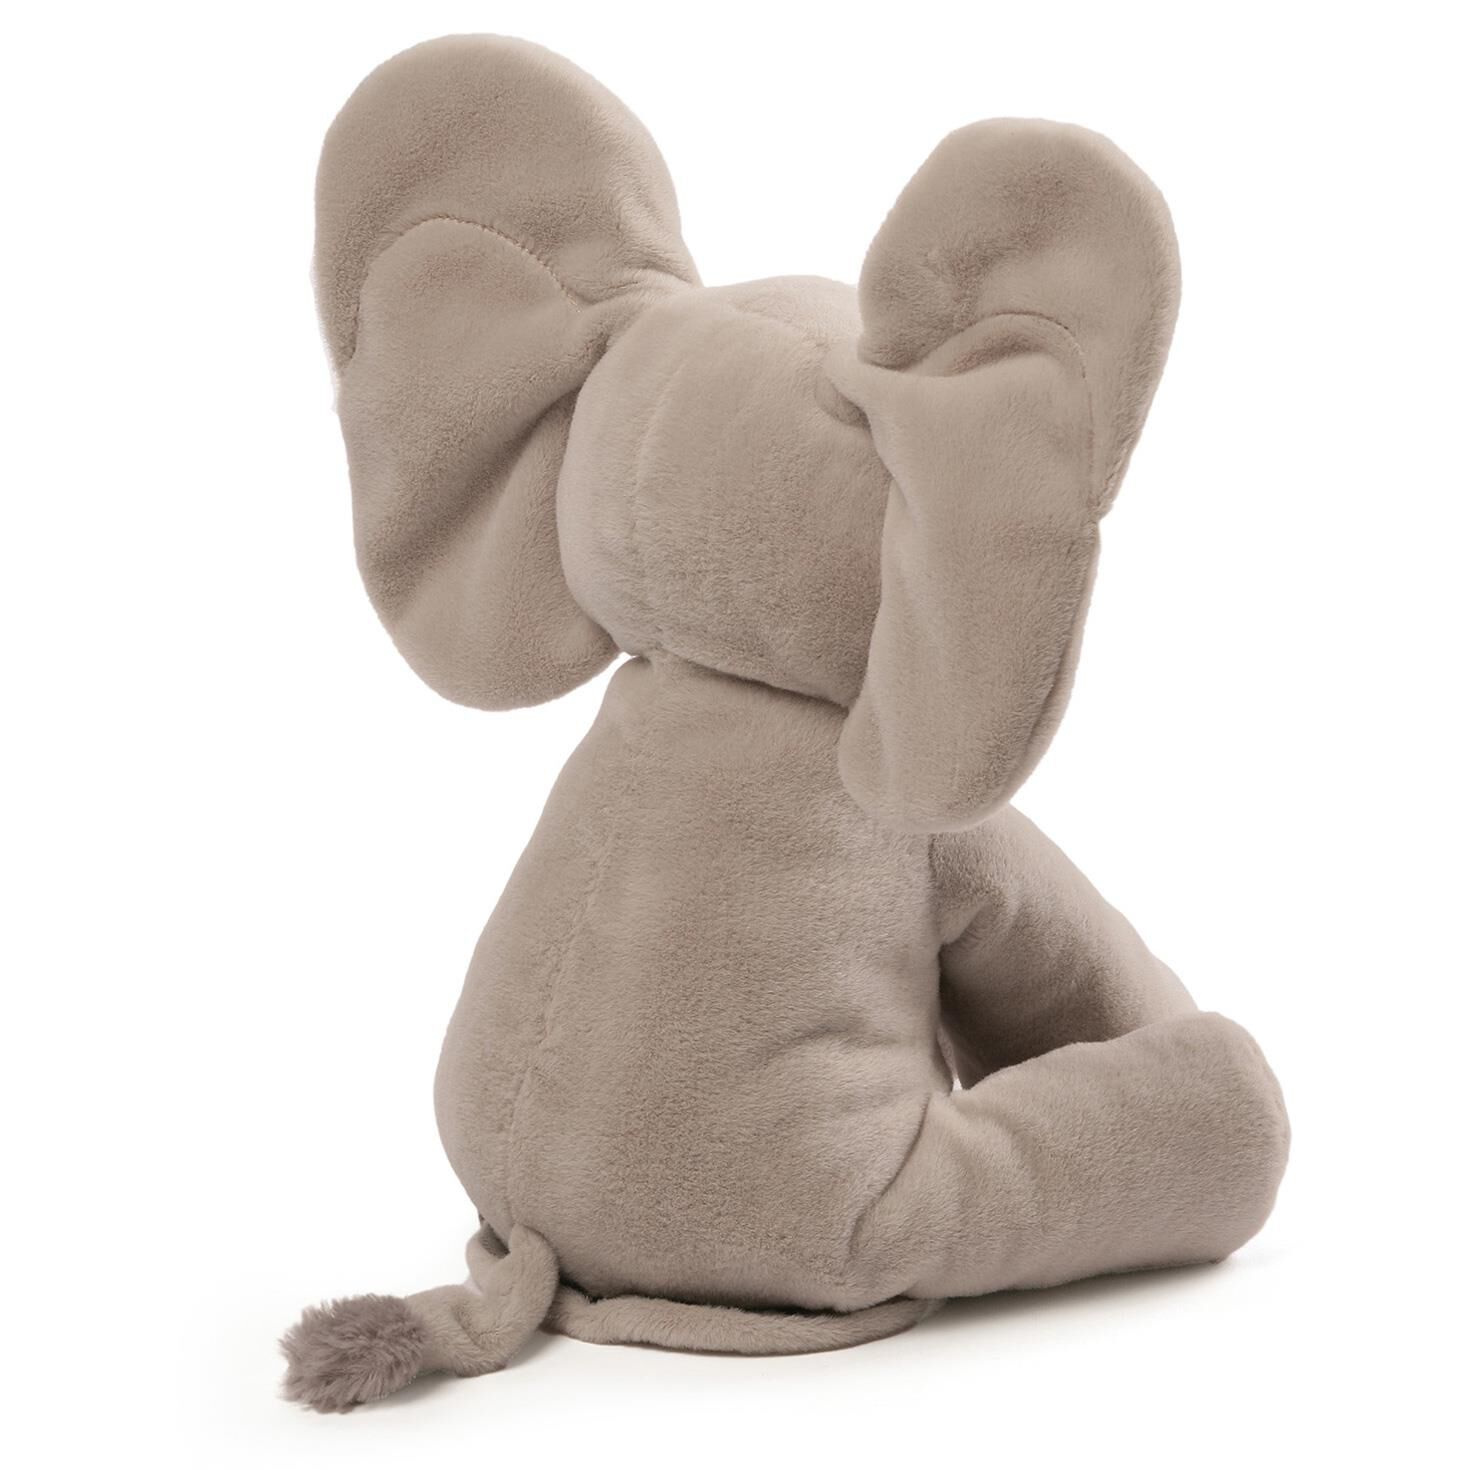 elephant toy that moves ears